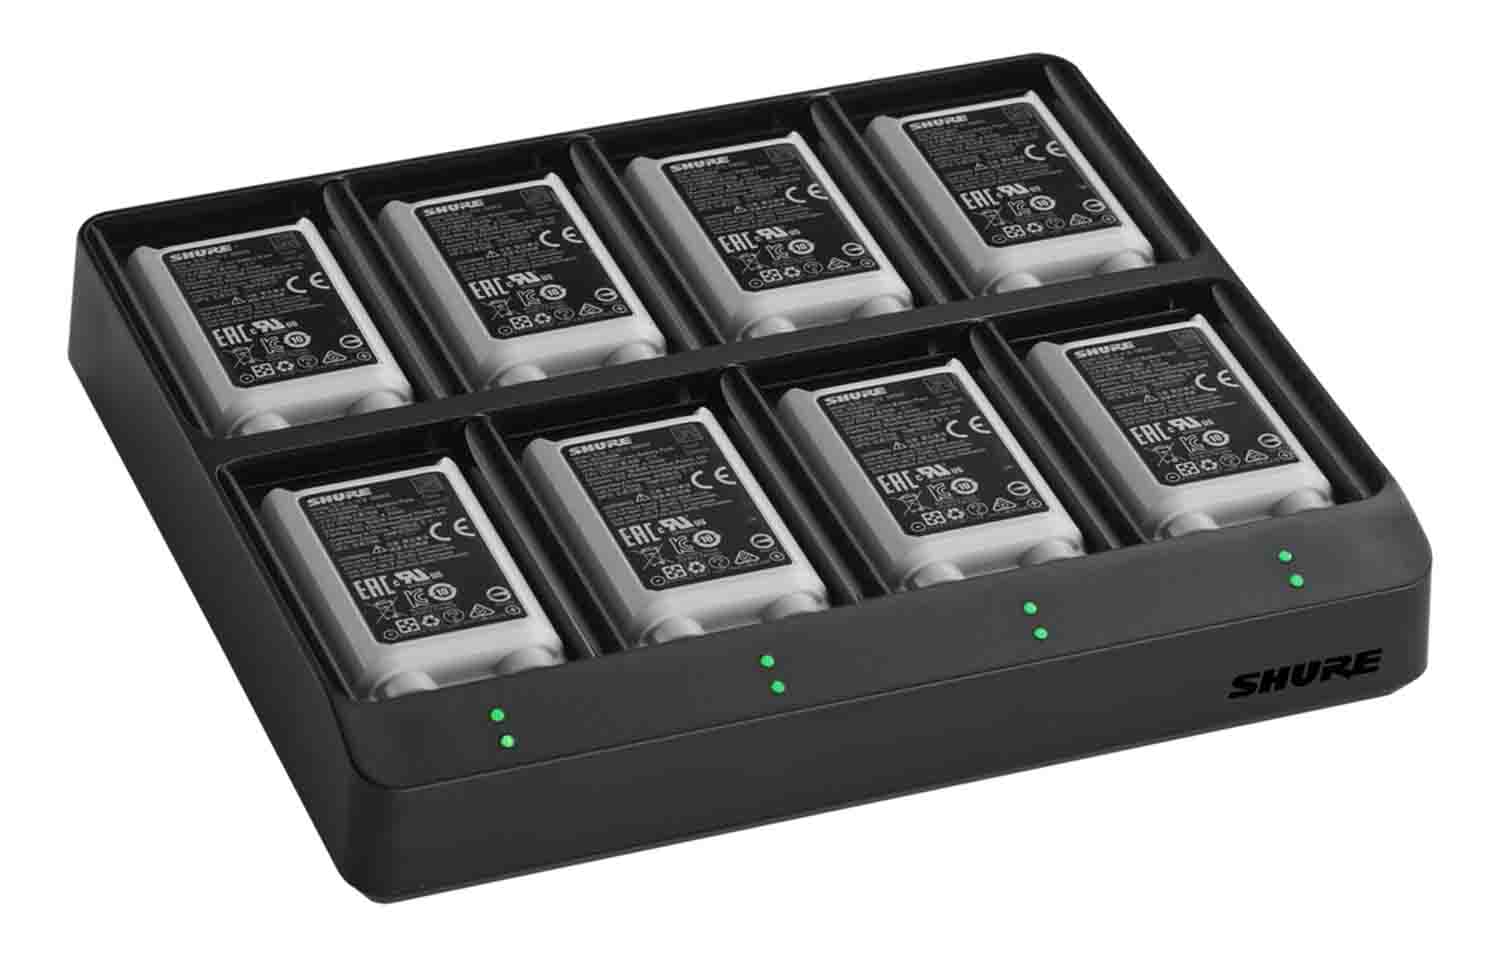 Shure SBC80-903, 8-Bay Battery Charger for SLX-D SB903 by Shure